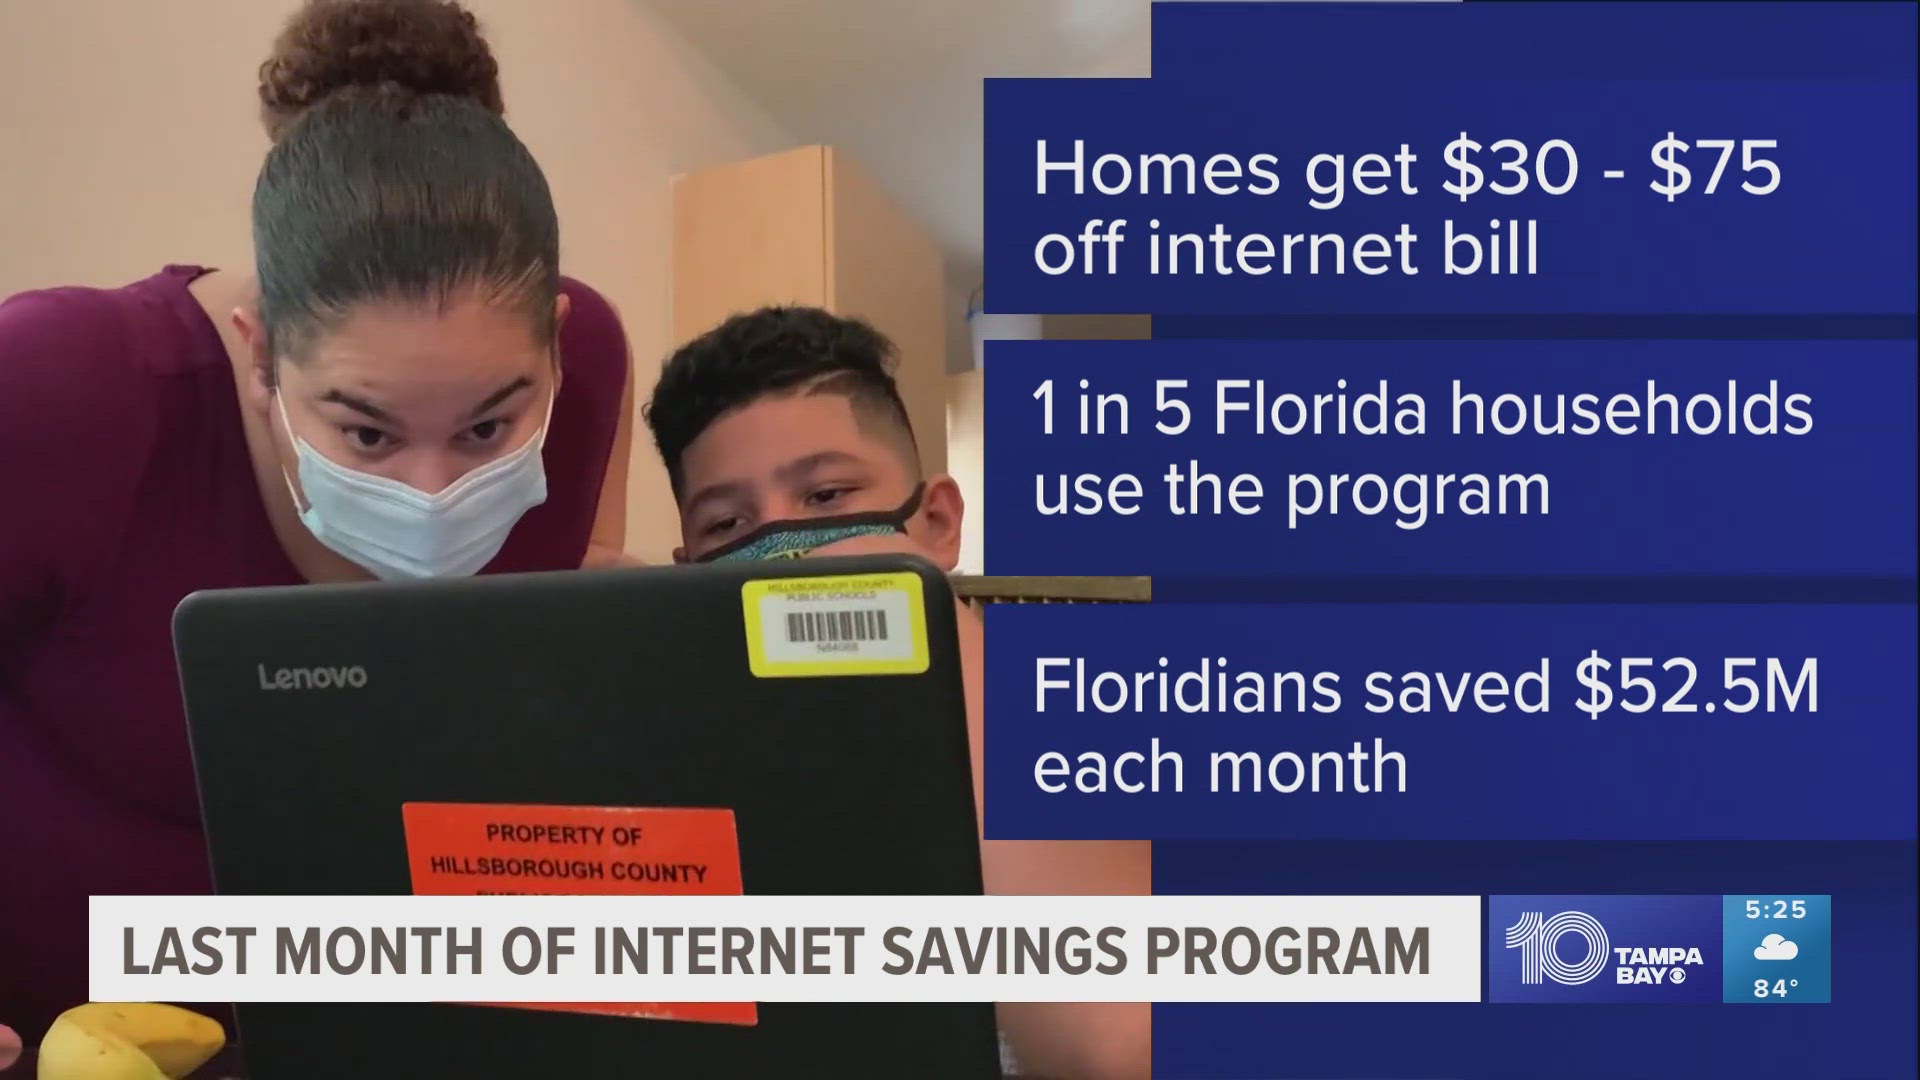 The program has helped one in five households in Florida.